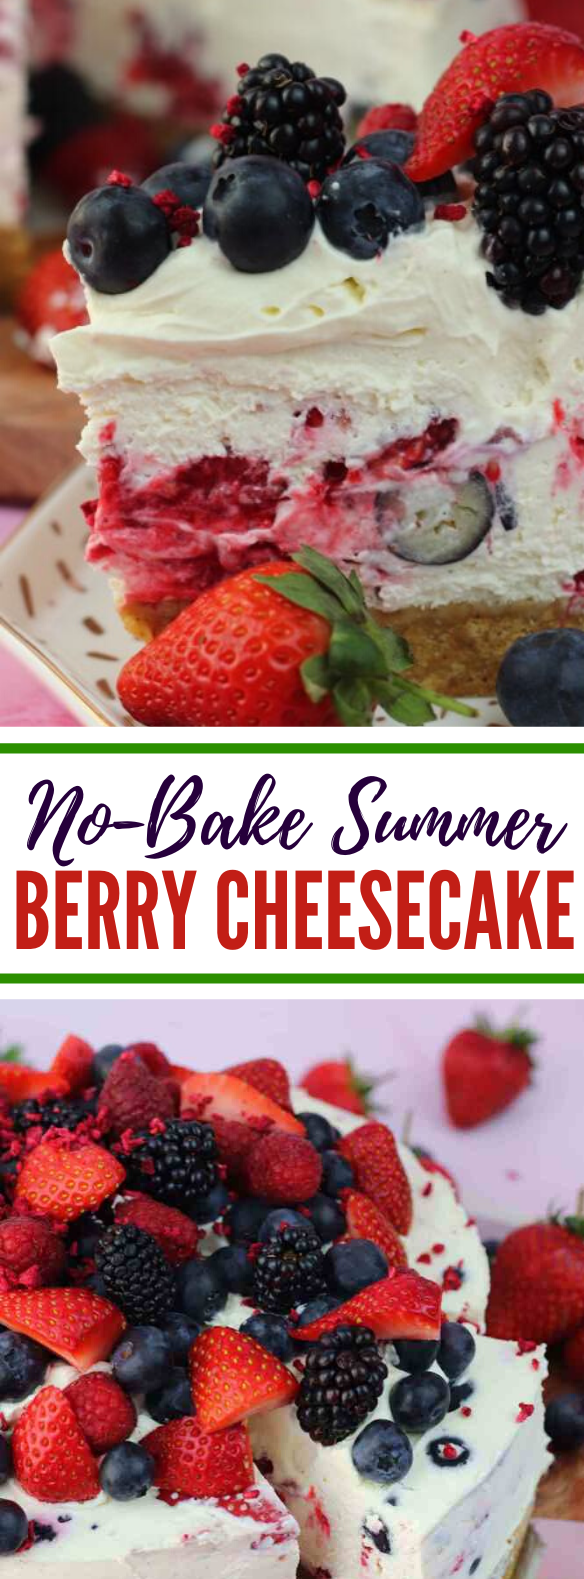 No-Bake Summer Berry Cheesecake #desserts #sweets